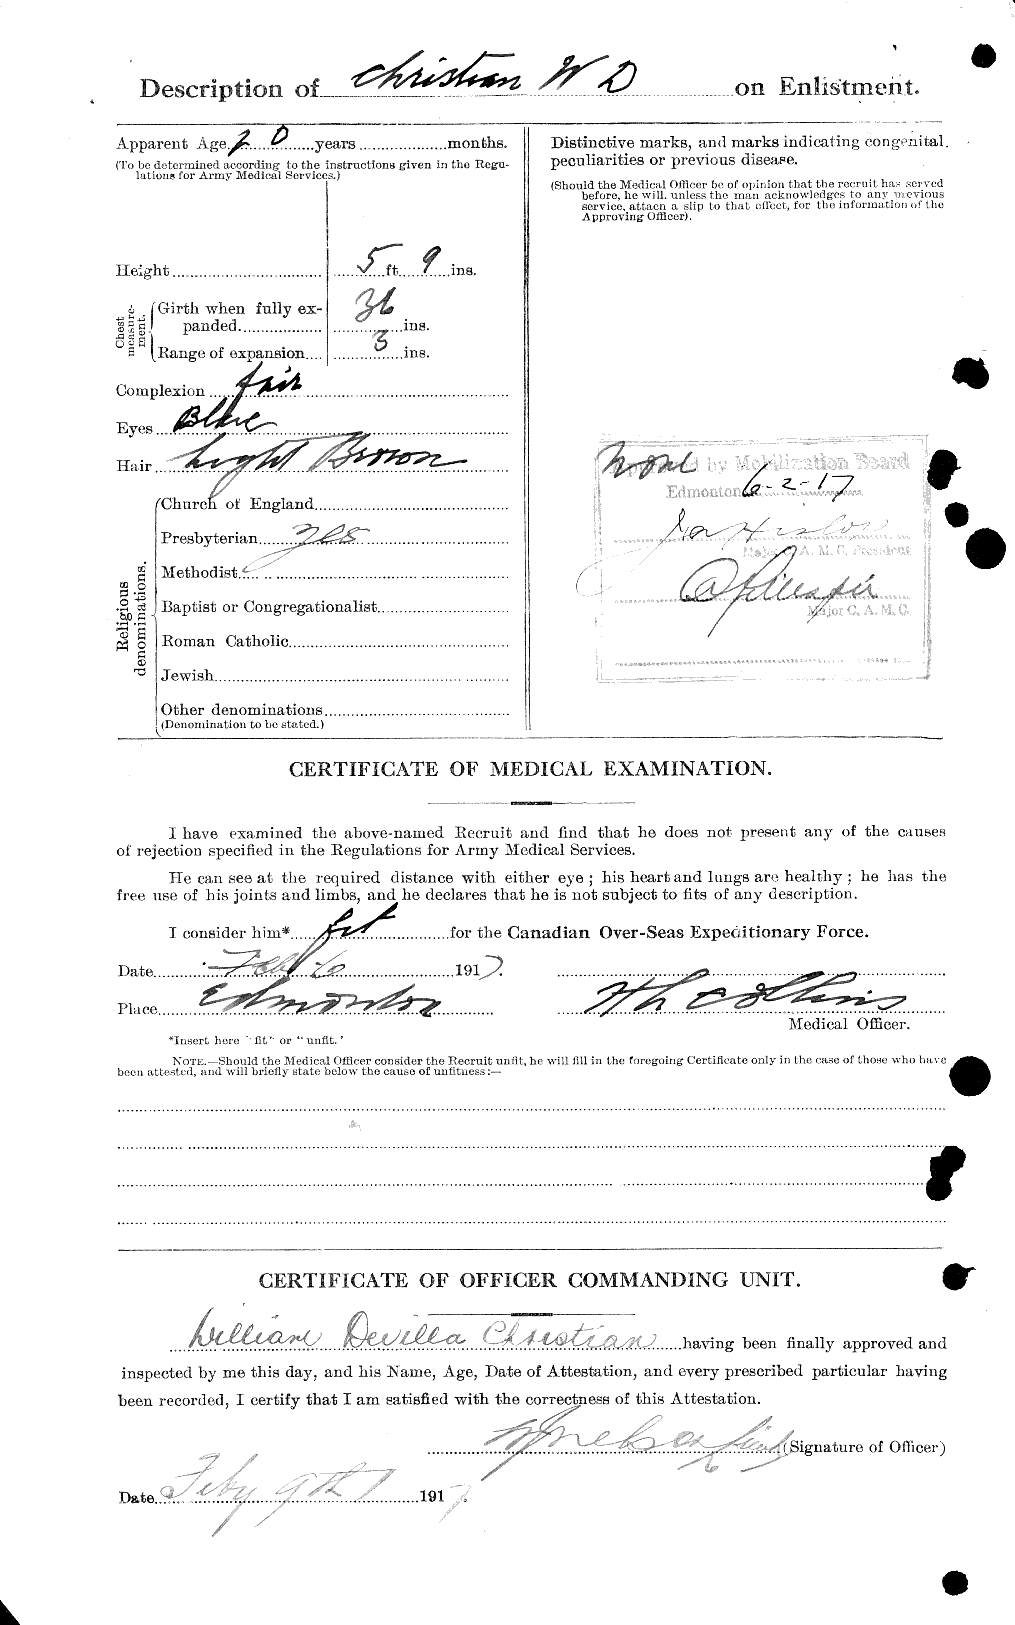 Personnel Records of the First World War - CEF 021709b